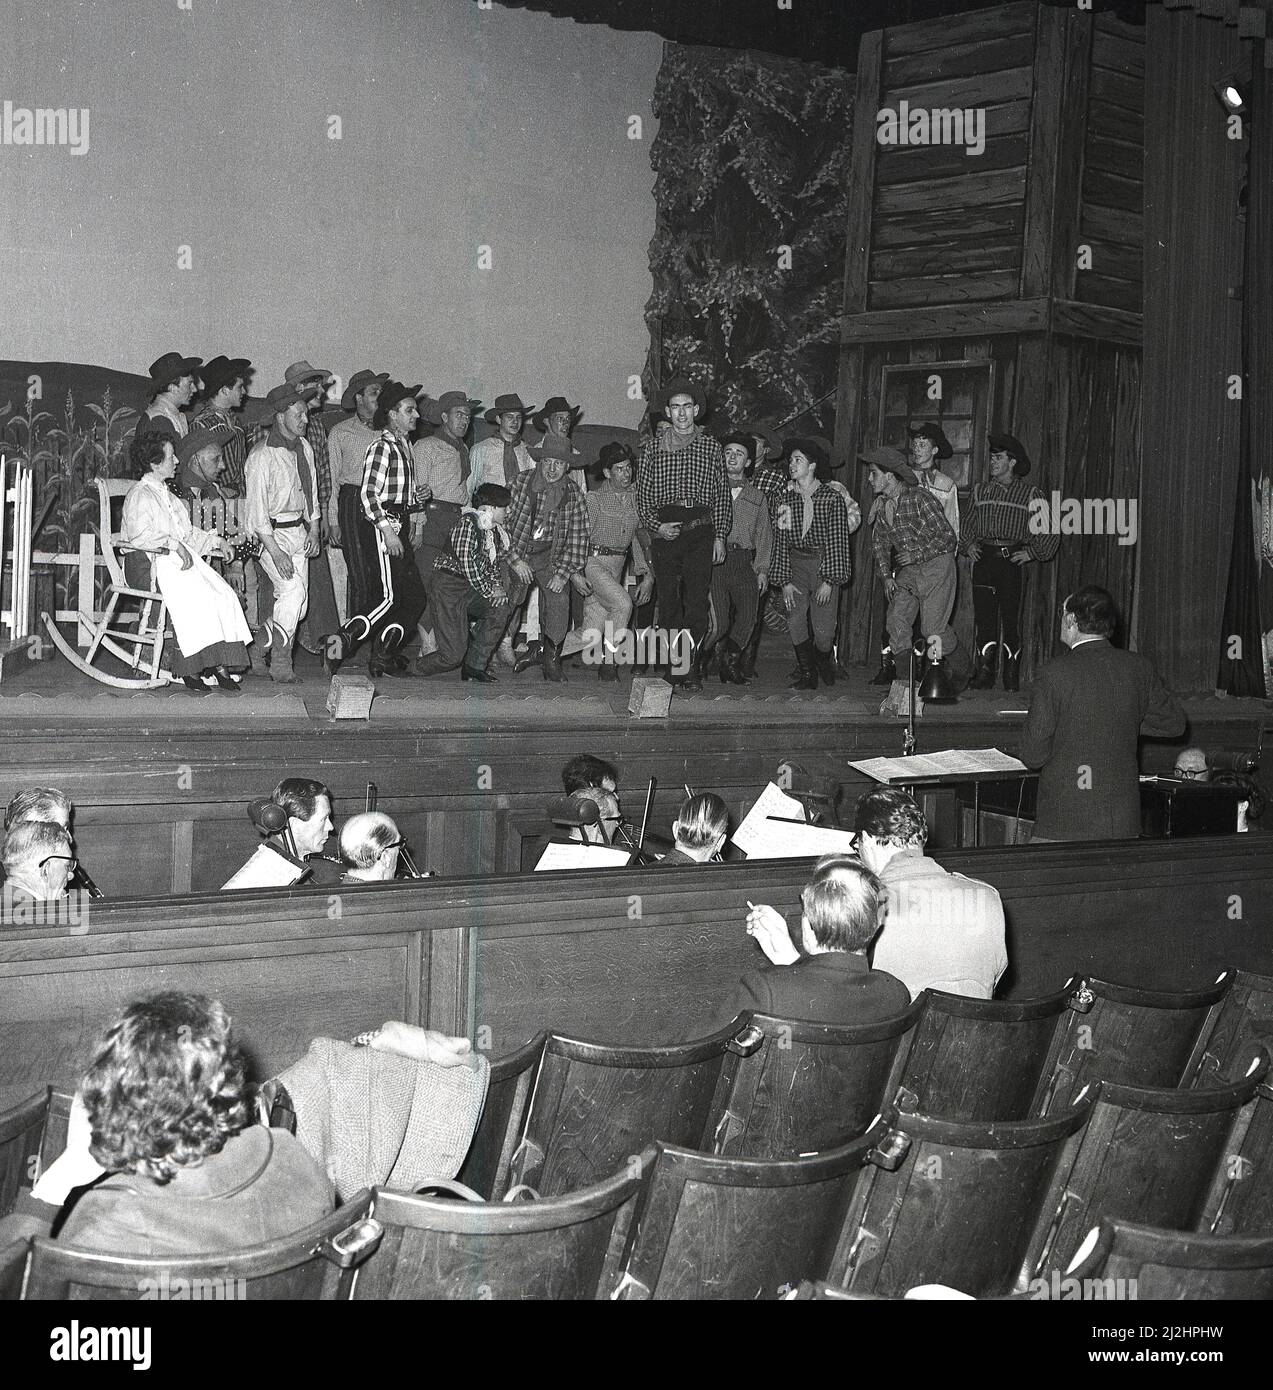 1960s, historical, large group of actors on a stage during a performance of the American musical Oklahoma, produced by the Kelty Musical Association at Carnegie Hall, Dufermline, Fife, Scotland, UK, with orchestra in pit. Based on the 1931 play, 'Green Grow the Lilacs', Oklahoma is the first musical written by Rodgers and Hammerstein, which opened on Broadway in 1943. Based on the romances of a simple farm girl, the musical is a popular choice for schools and community groups to perform. Stock Photo